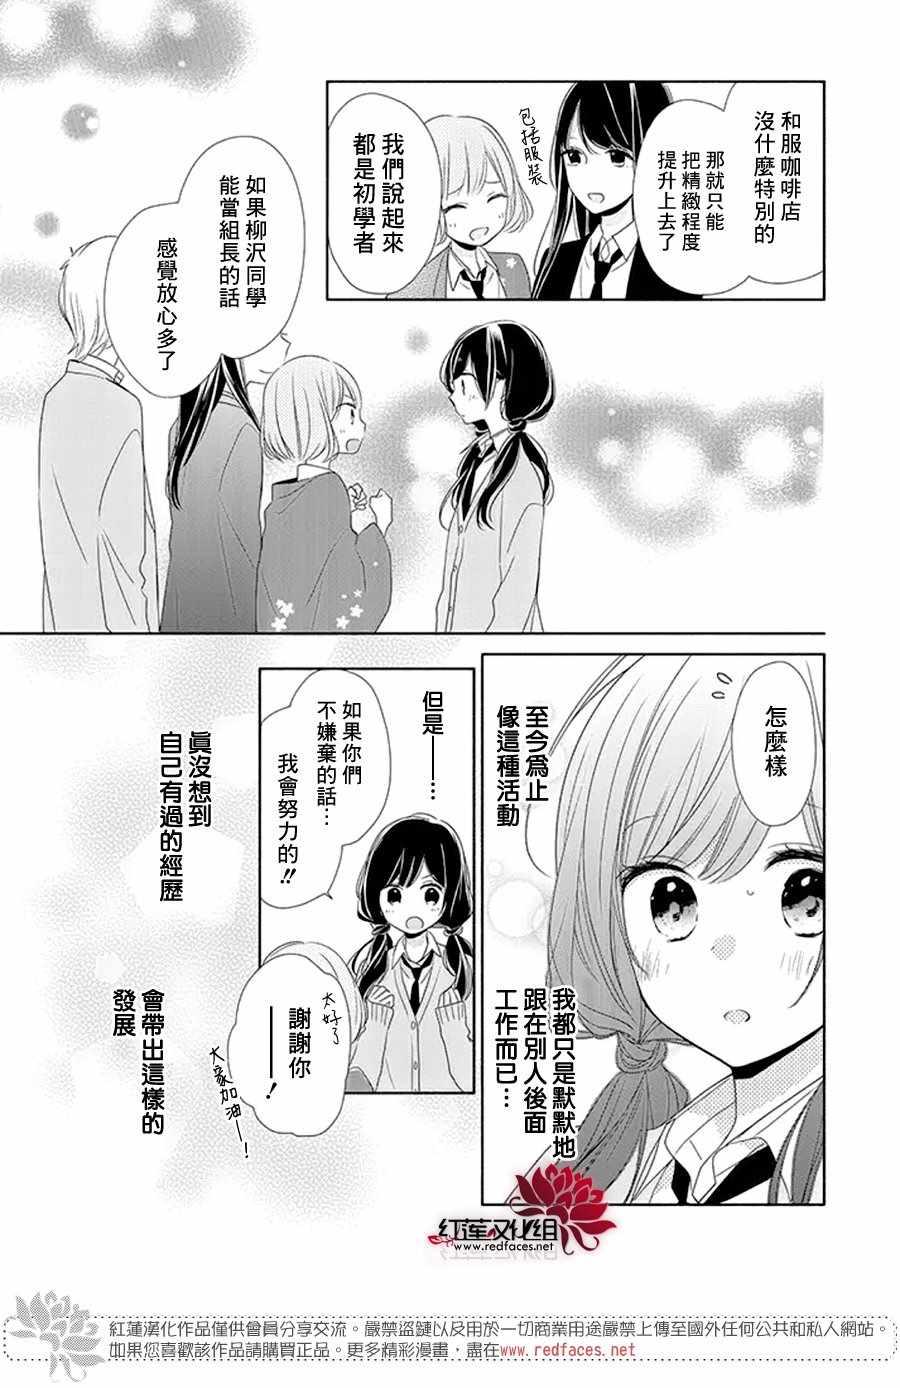 If given a second chance - 15話 - 1